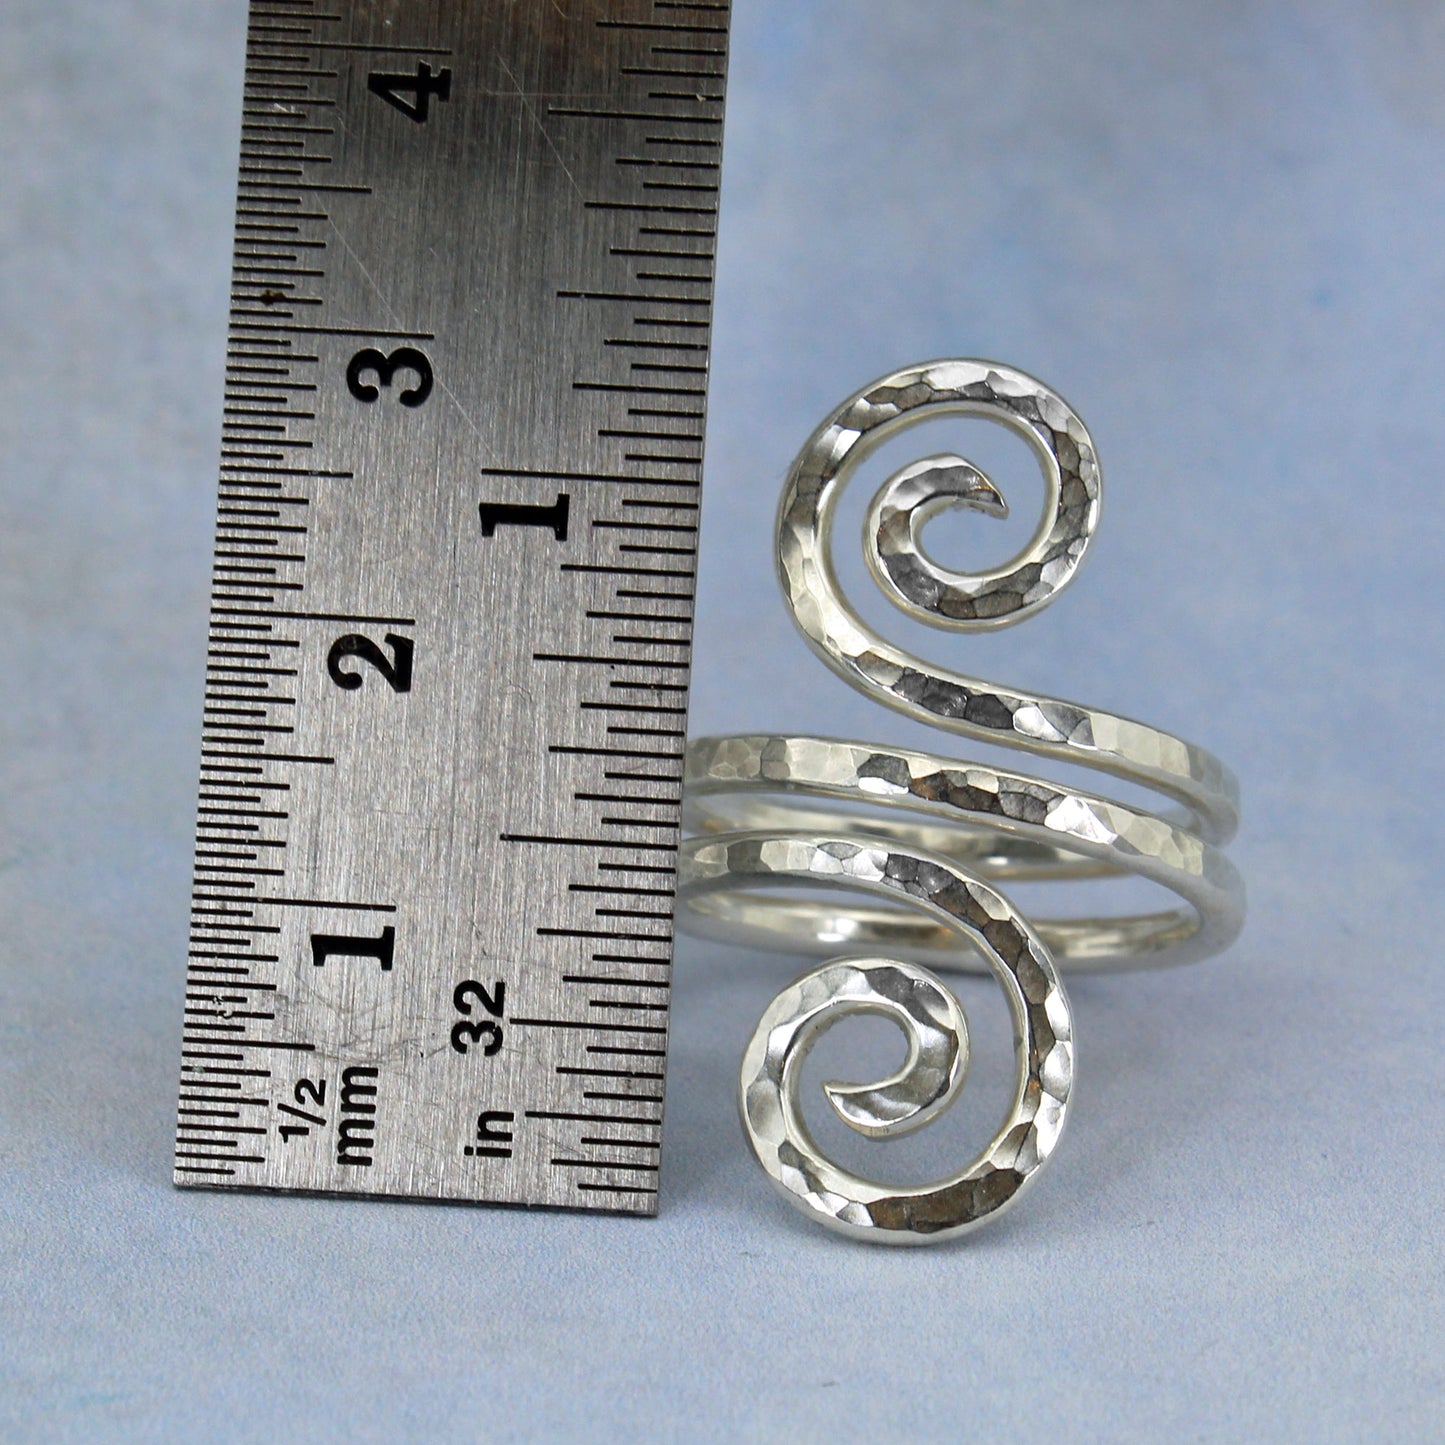 Spiral ring with ruler